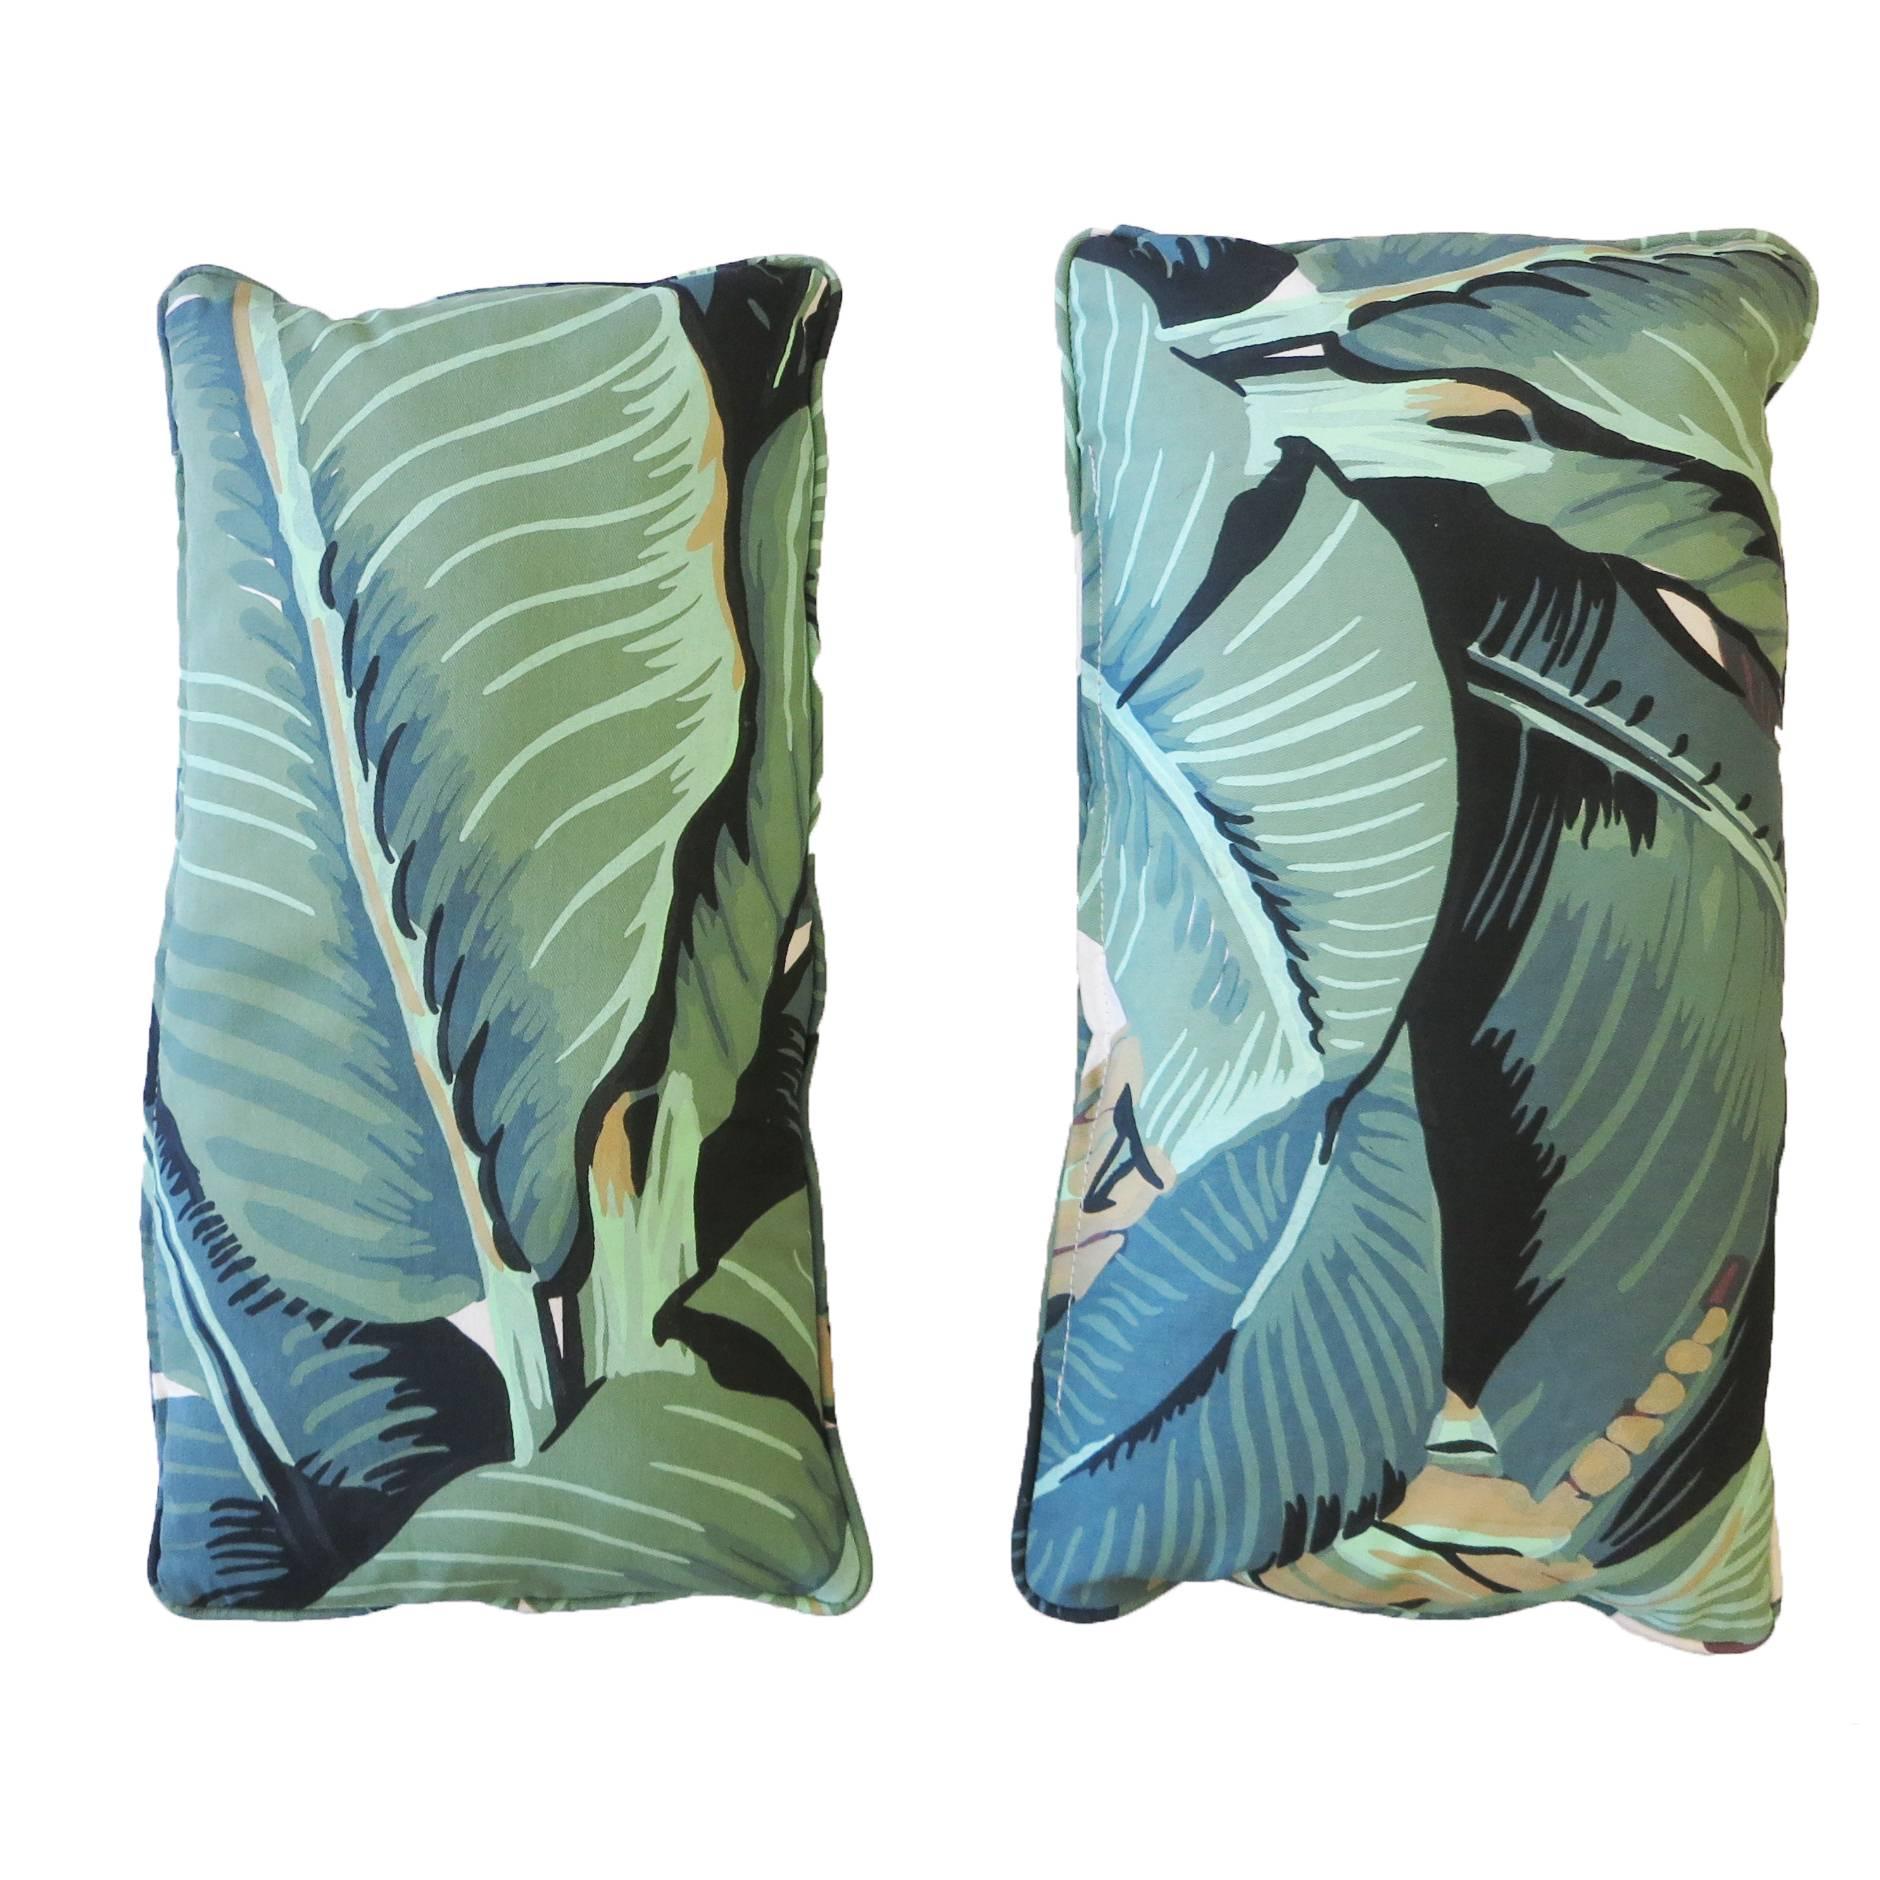 Custom-made Beverly palms lumbar cushions with the same pattern was created by decorator Don Loper in 1942 for the Beverly hills hotel.